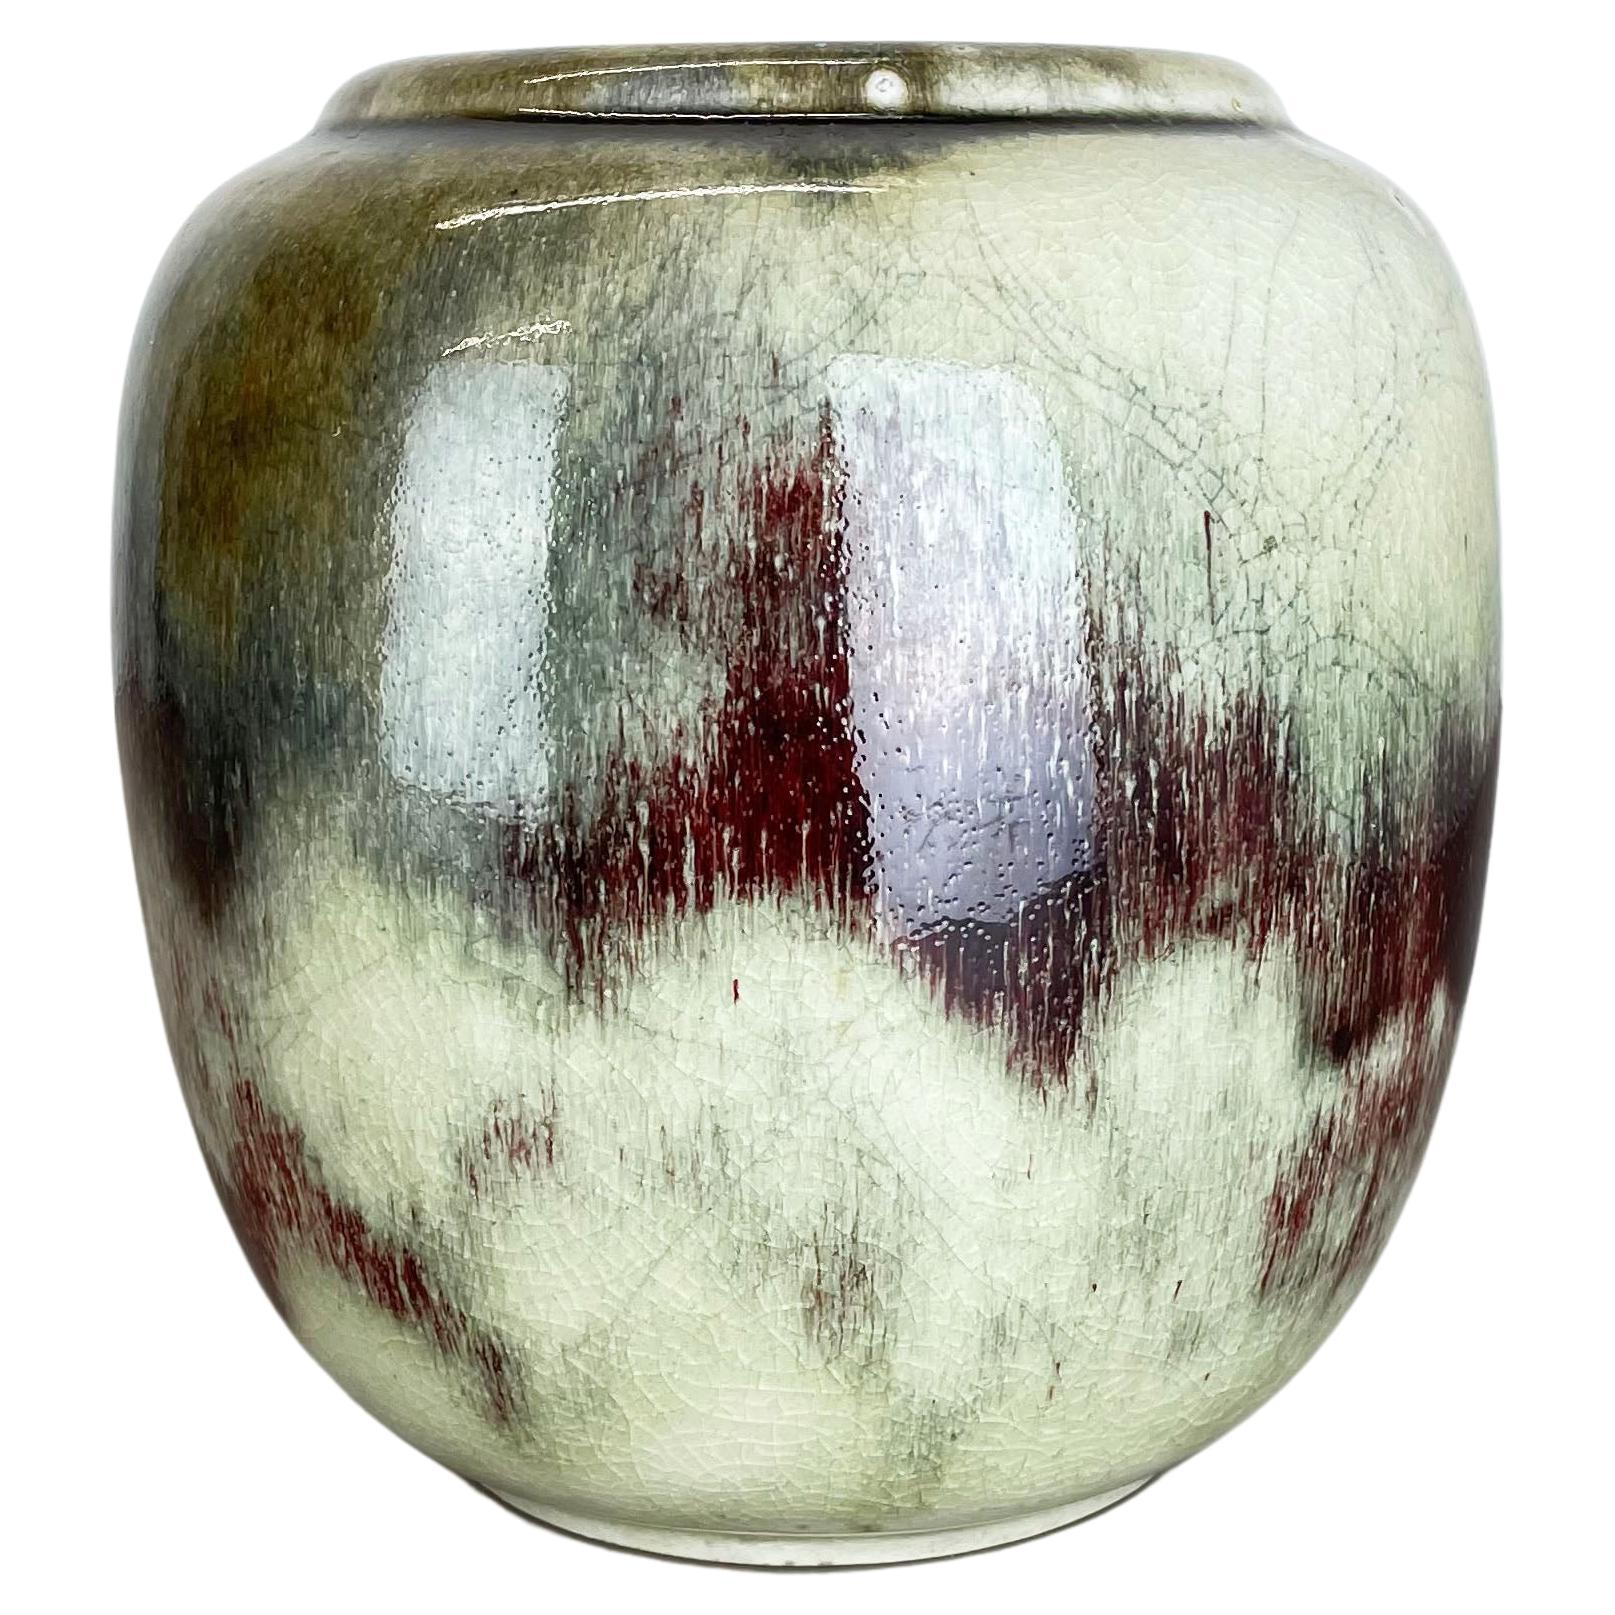 Unique Abstract Bauhaus Vase Pottery by WMF Ikora, Germany 1930s Art Deco For Sale